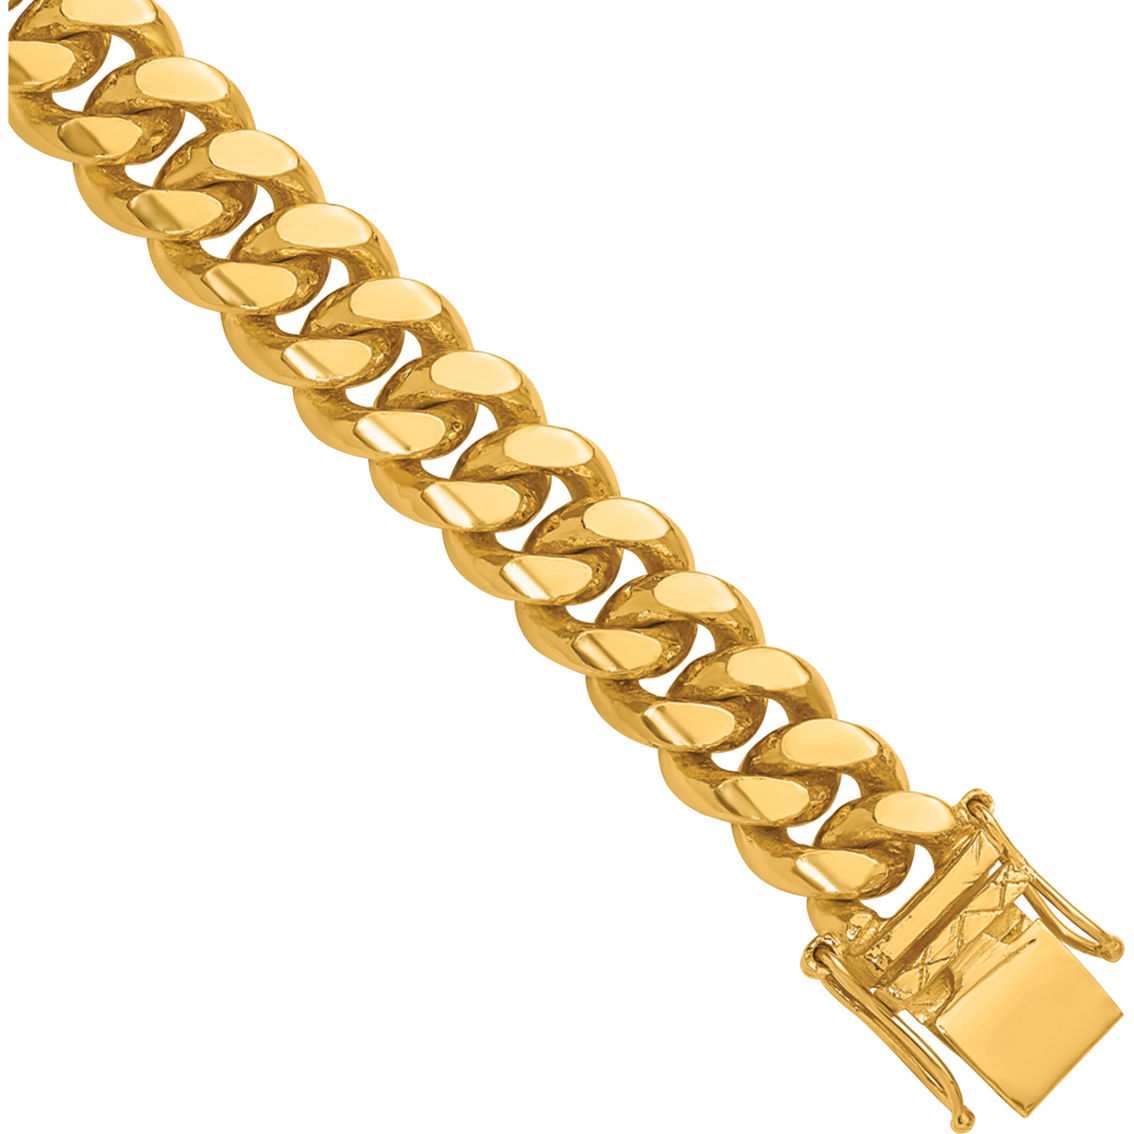 24K Pure Gold 24K Yellow Gold 12mm Solid Curb 8.5 in. Chain Bracelet - Image 4 of 5